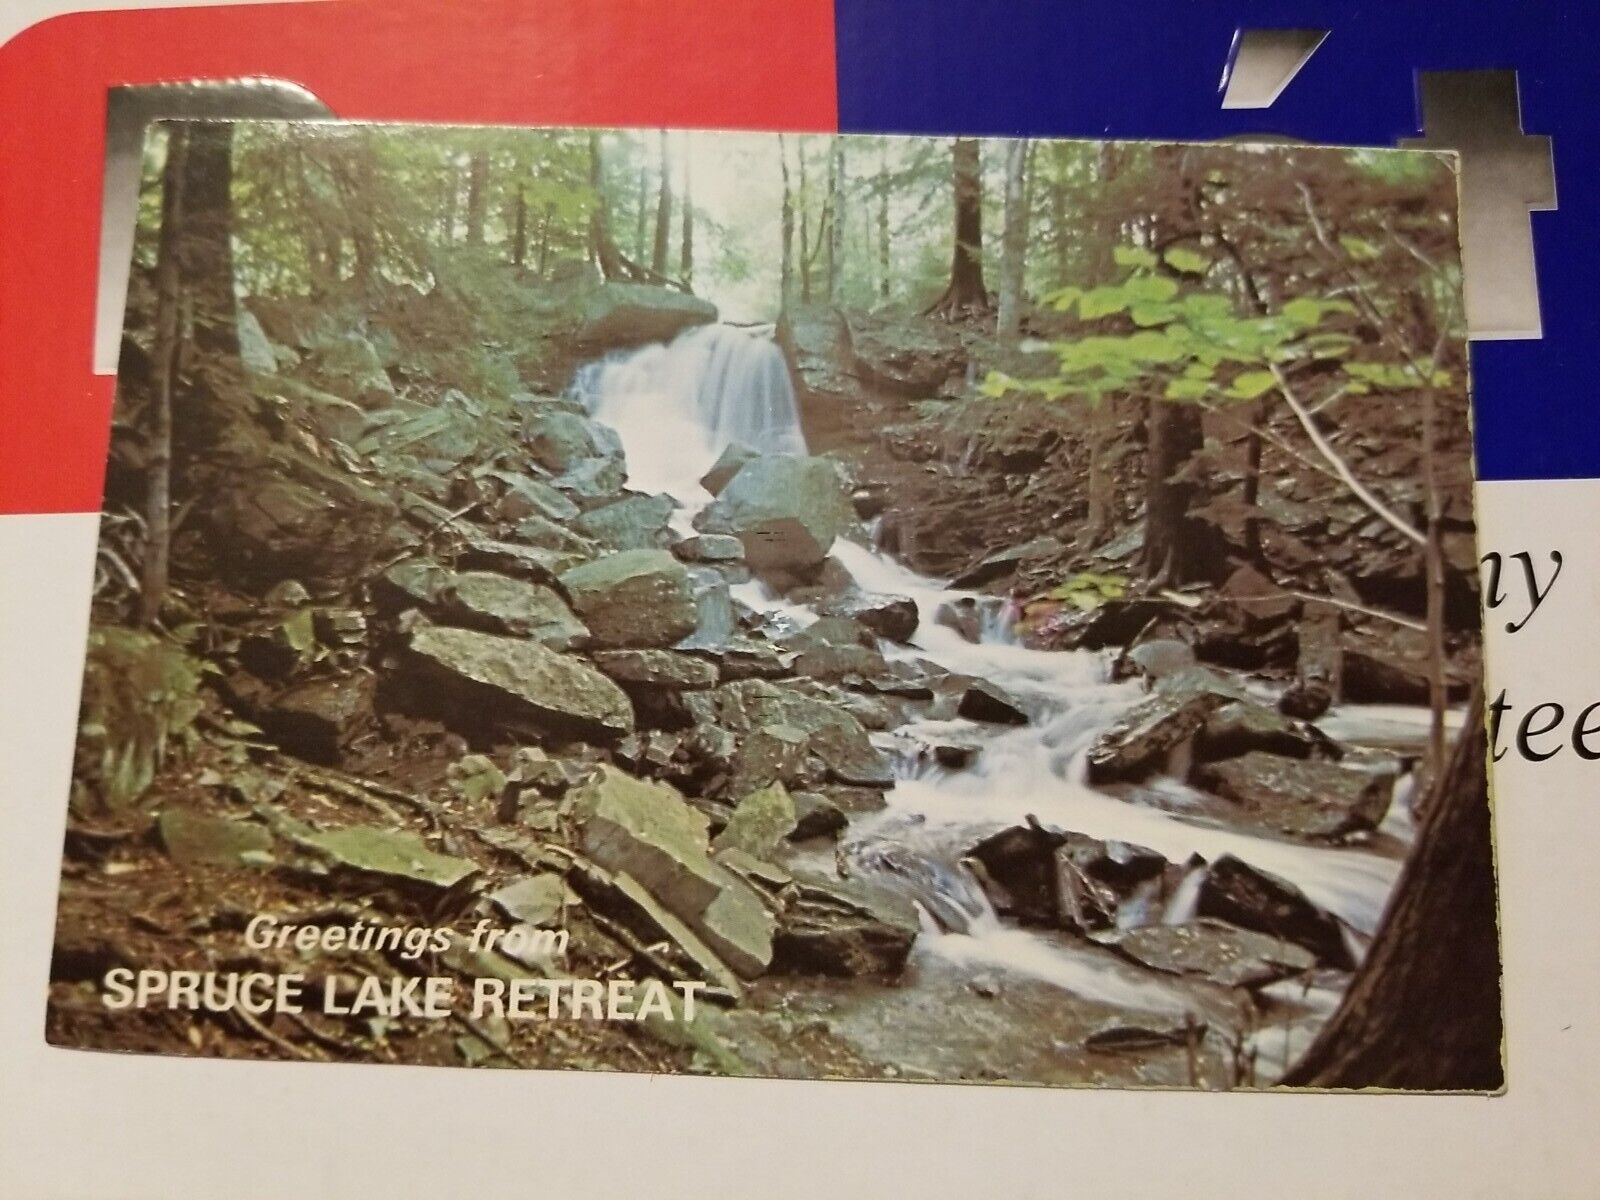 Greetings From Spruce Lake Retreat Canadensis Pennsylvania Posted 1993 